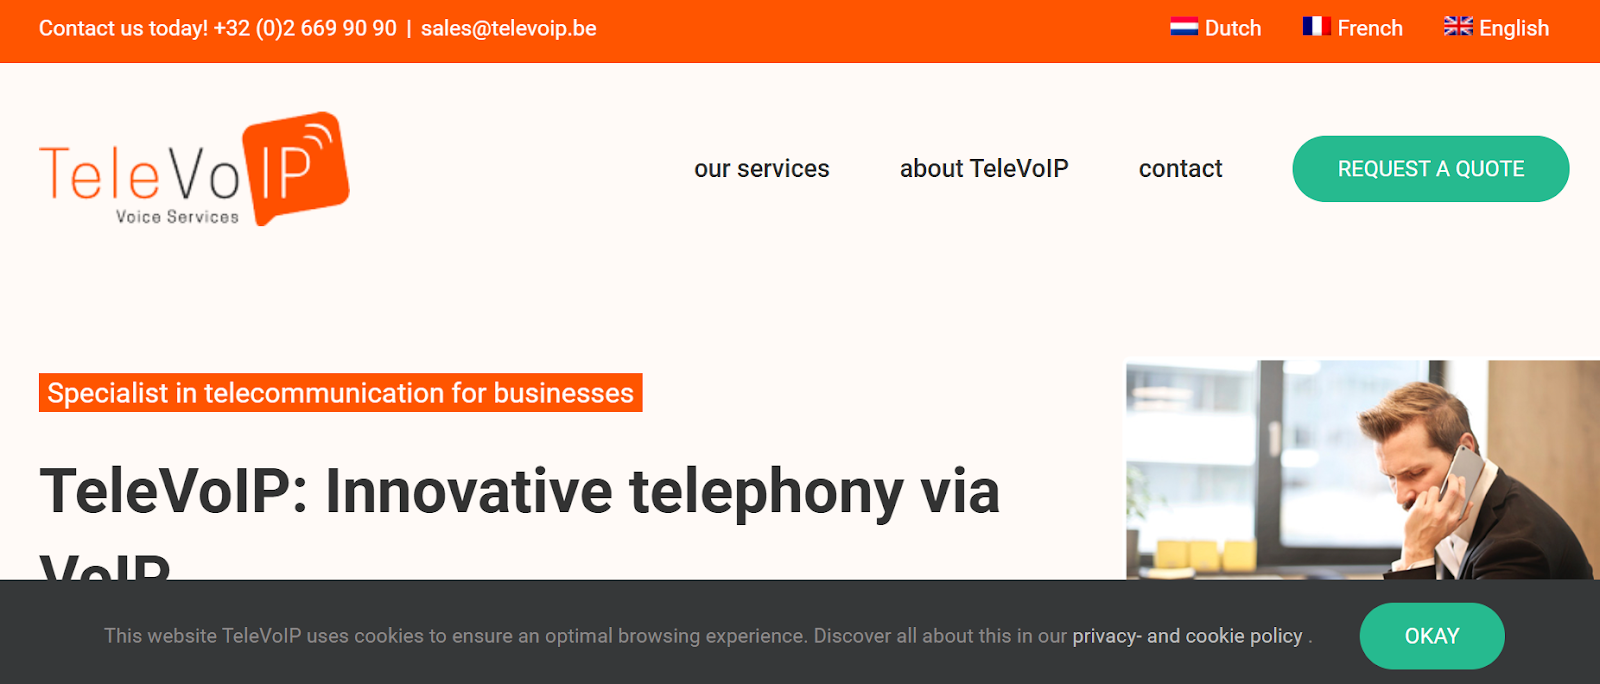 TeleVoIP website snapshot highlighting the services it offers.